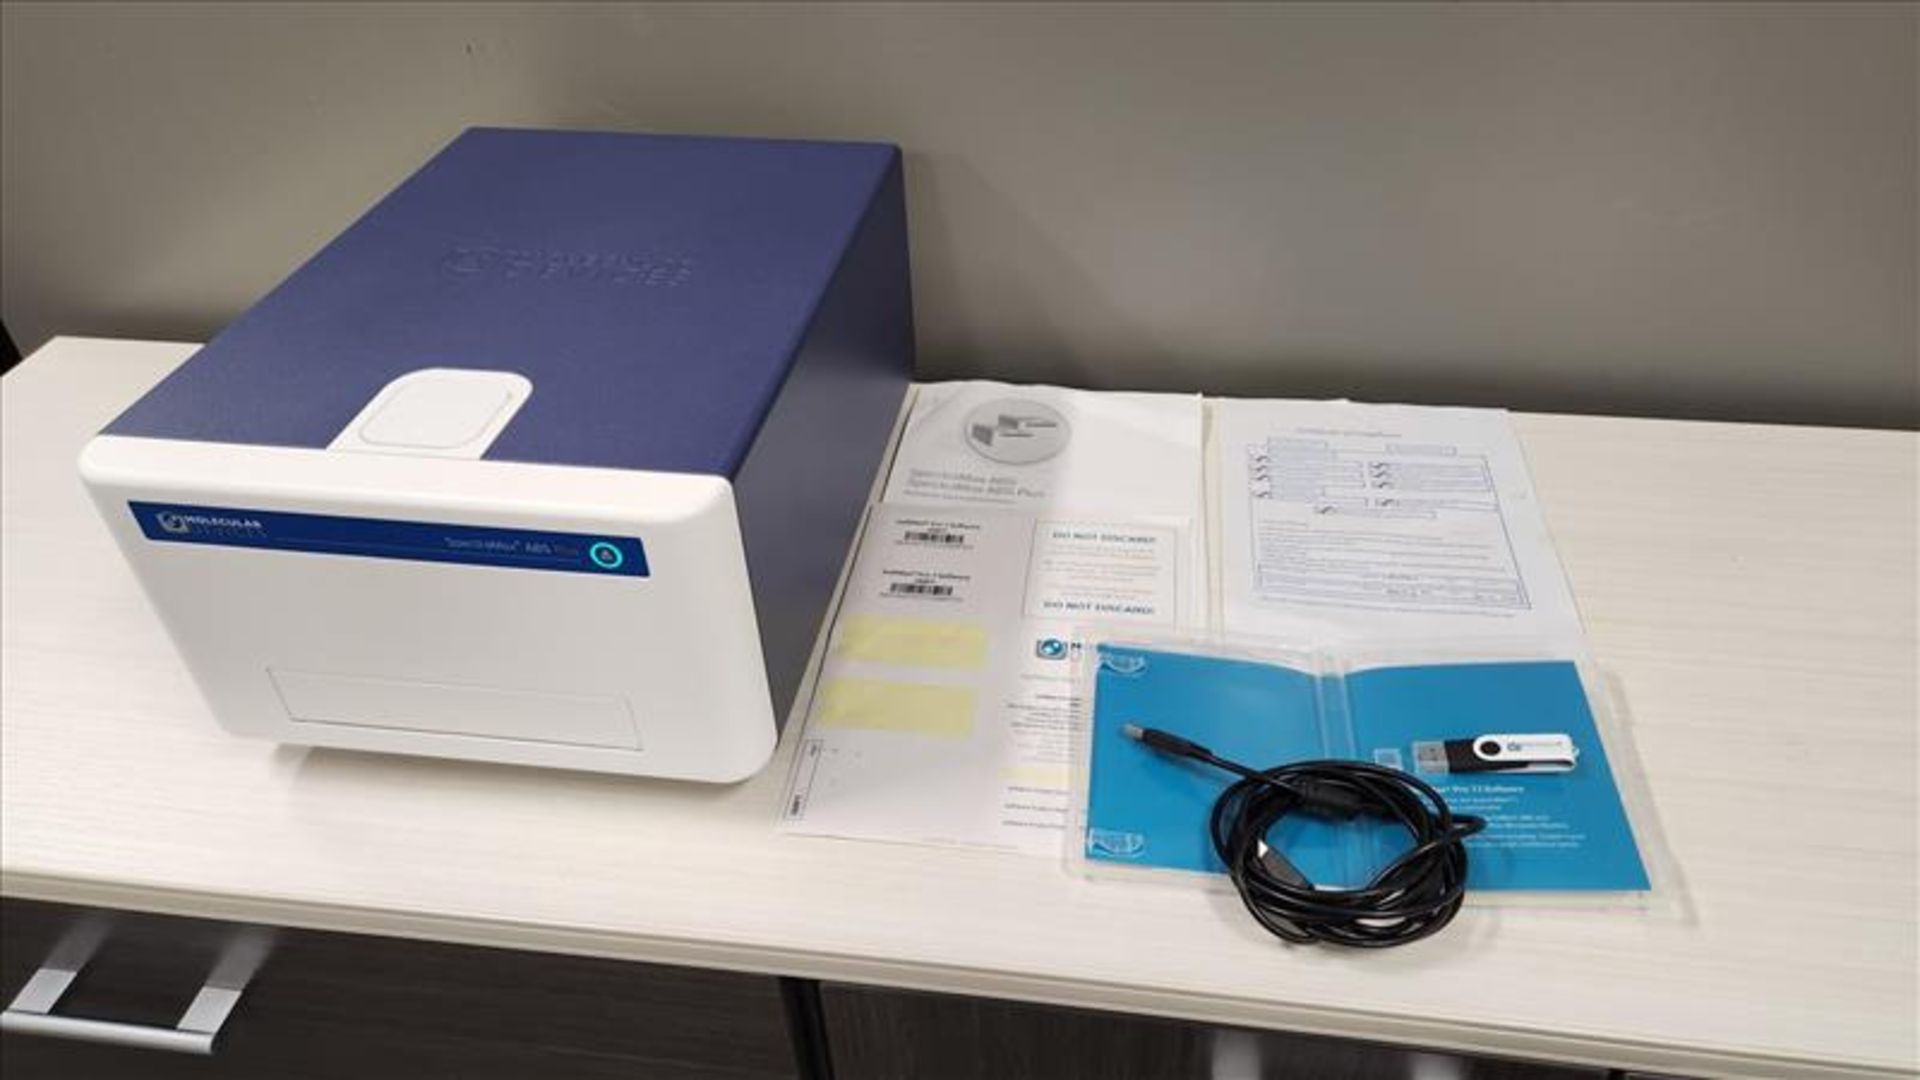 Molecular Devices SpectraMax ABS Plus Absorbance Microplate Reader, S/N ABP01300 with SoftMax Pro